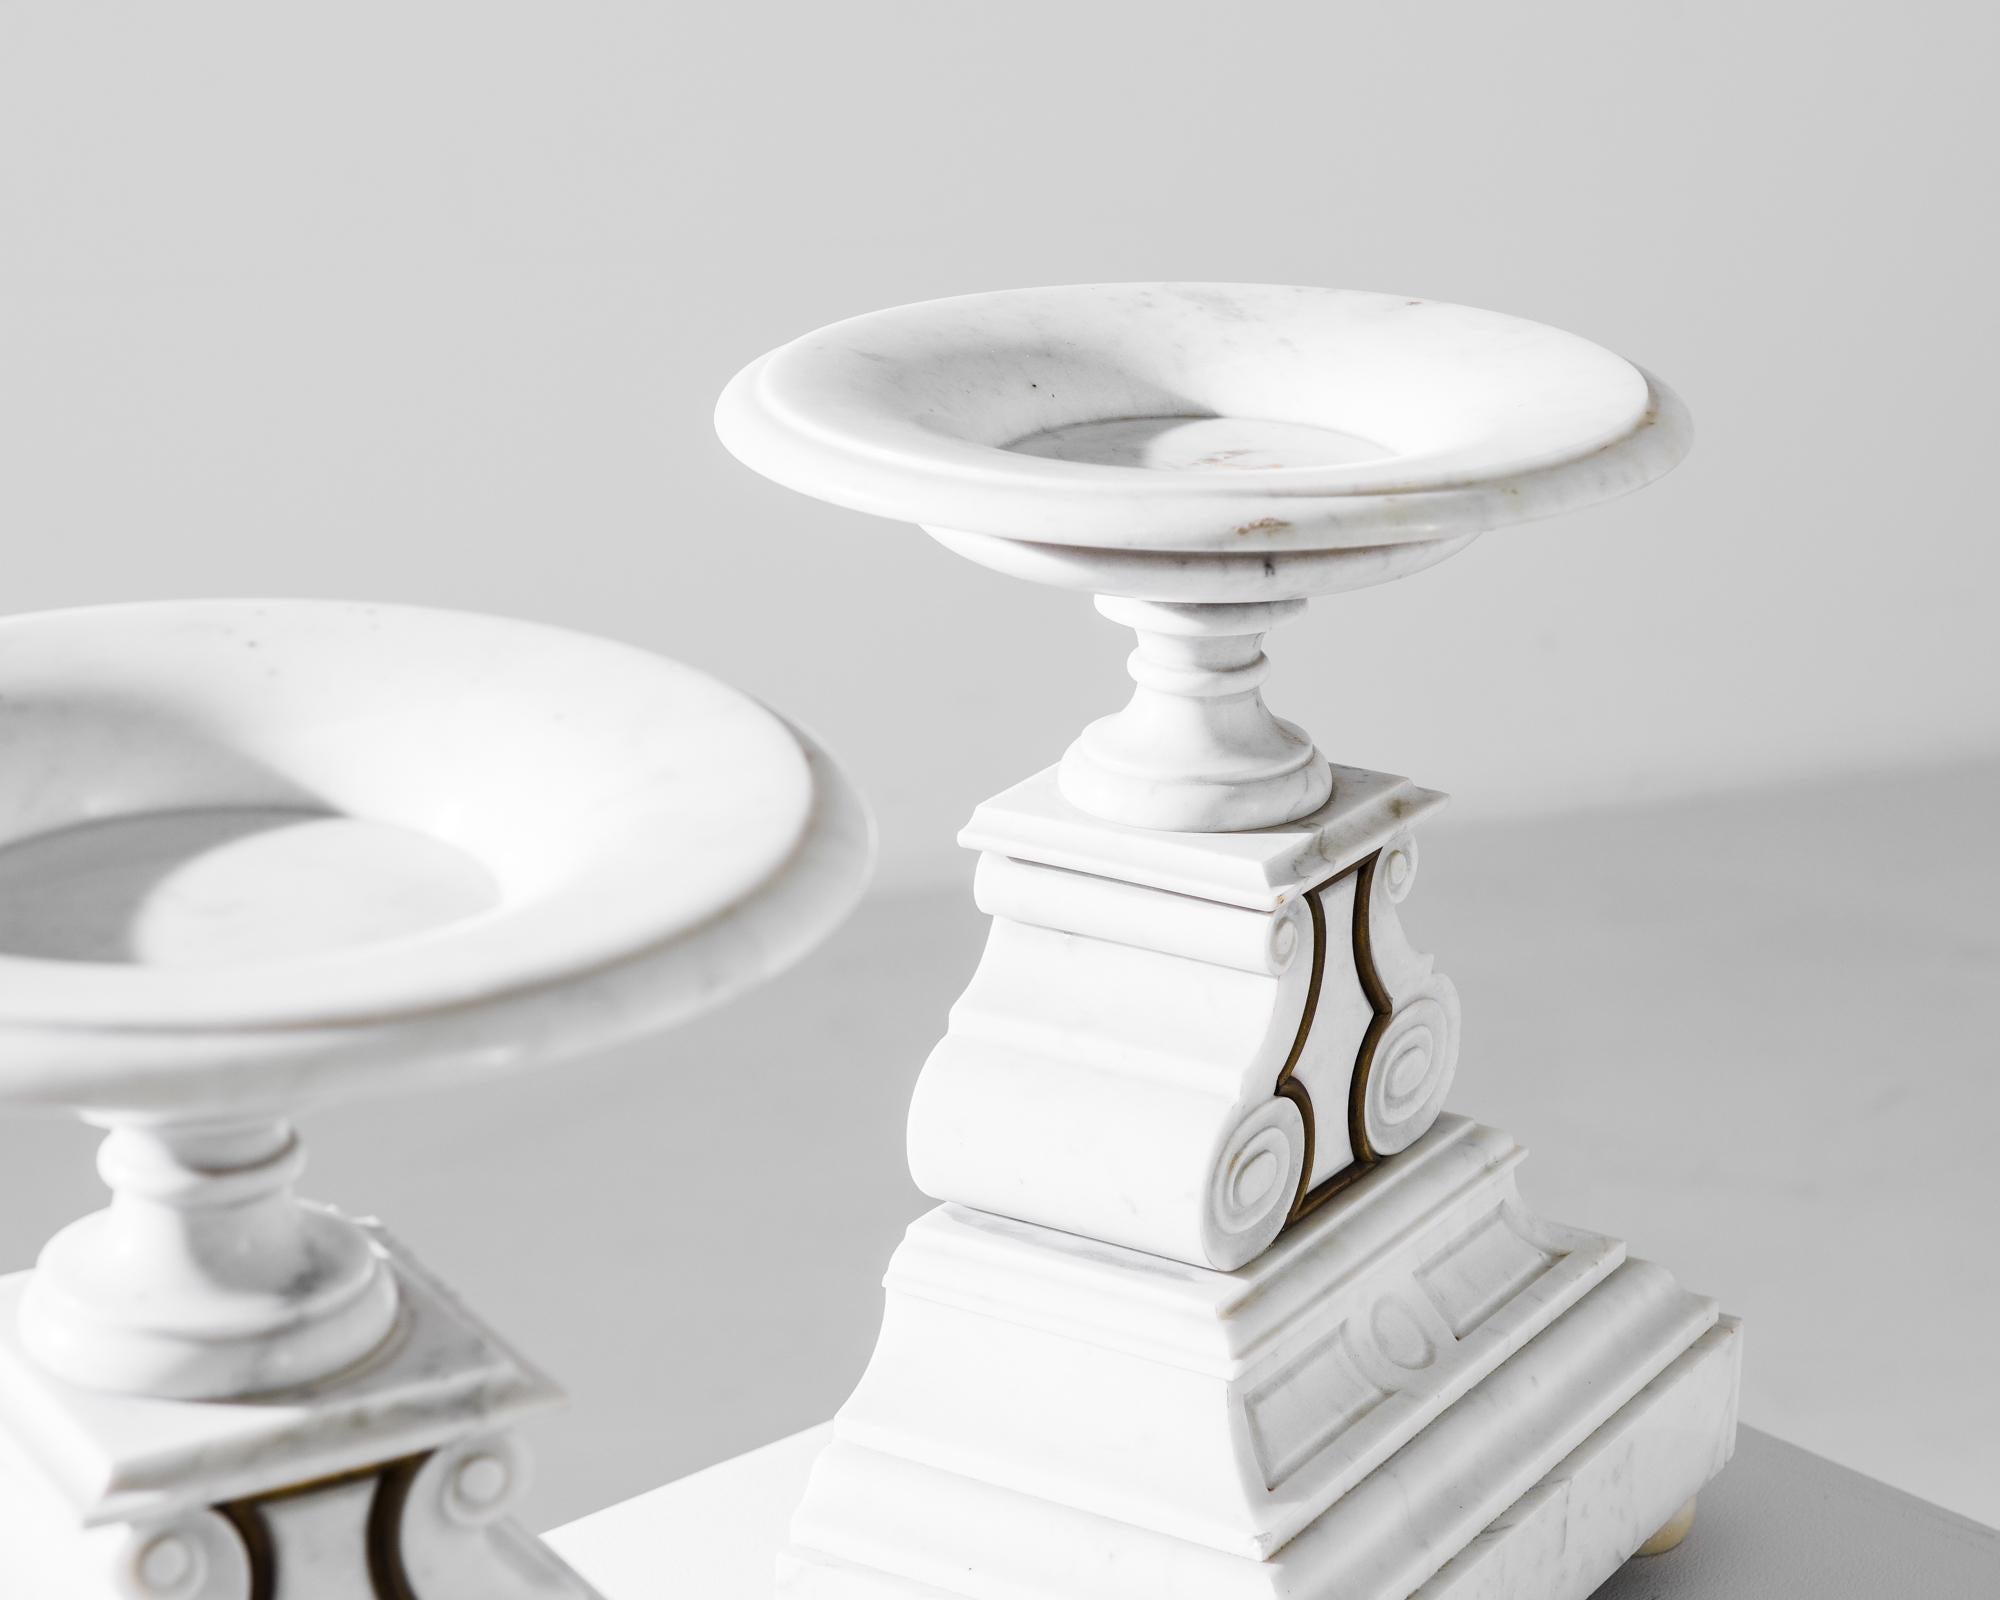 An elegant pair of marble pedestals from 1920s France. A tapered pyramidal base in pristine white marble is crowned by a circular dish. Carved scrolls, accentuated by gilded metal accents, add a touch of Beaux Arts embellishment — combining the